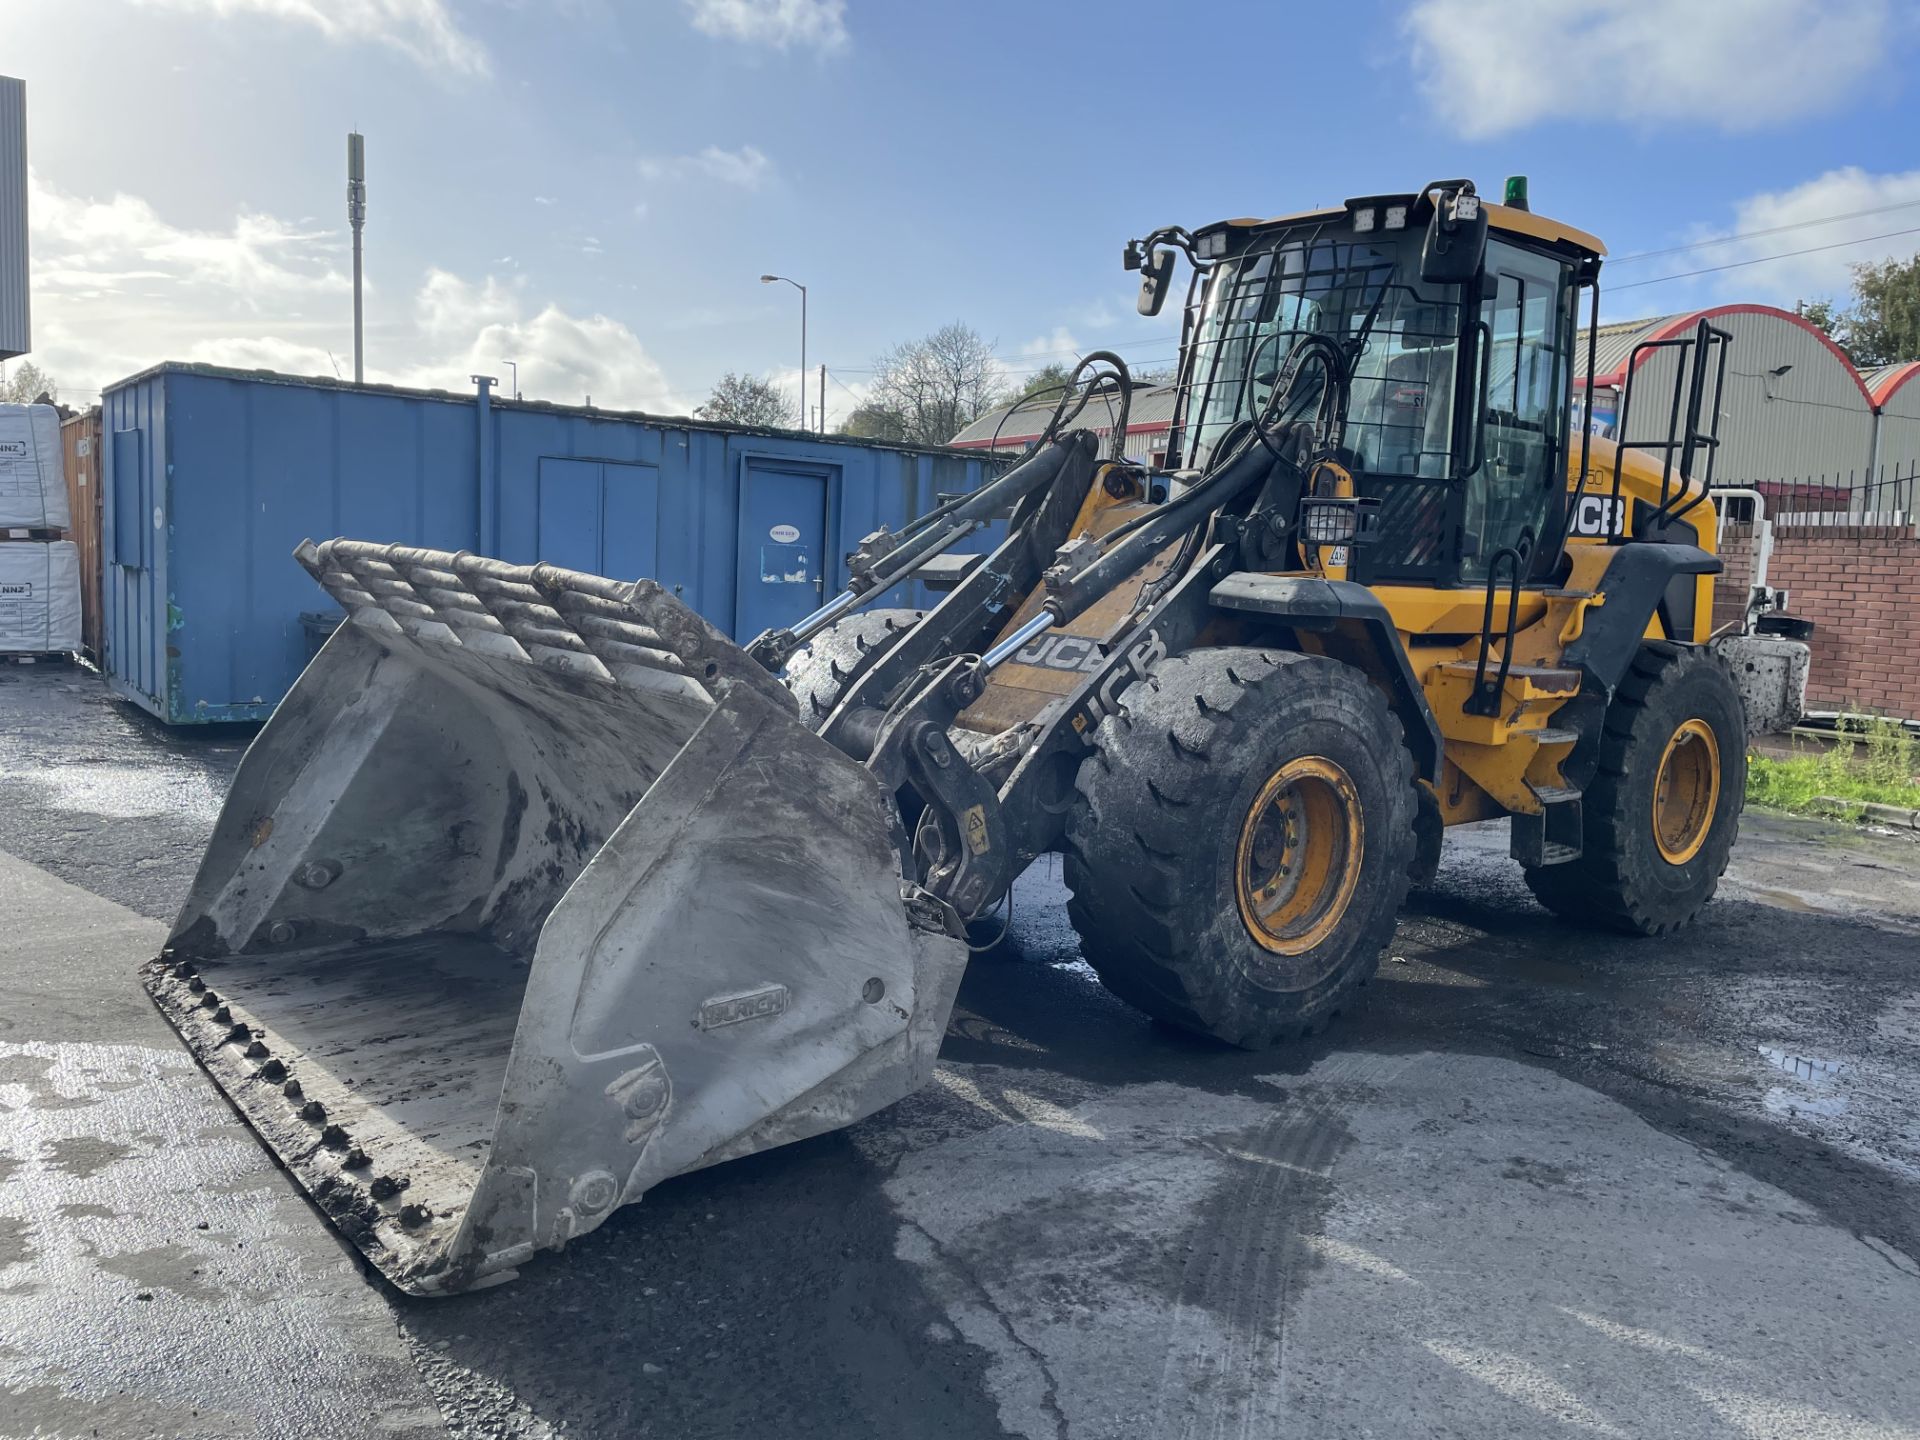 JCB, Wastemaster 427 S5, wheel loader, PIN: JCB4A5A9CK2679907 (2019) Last known Hours 2639.8, - Image 18 of 25